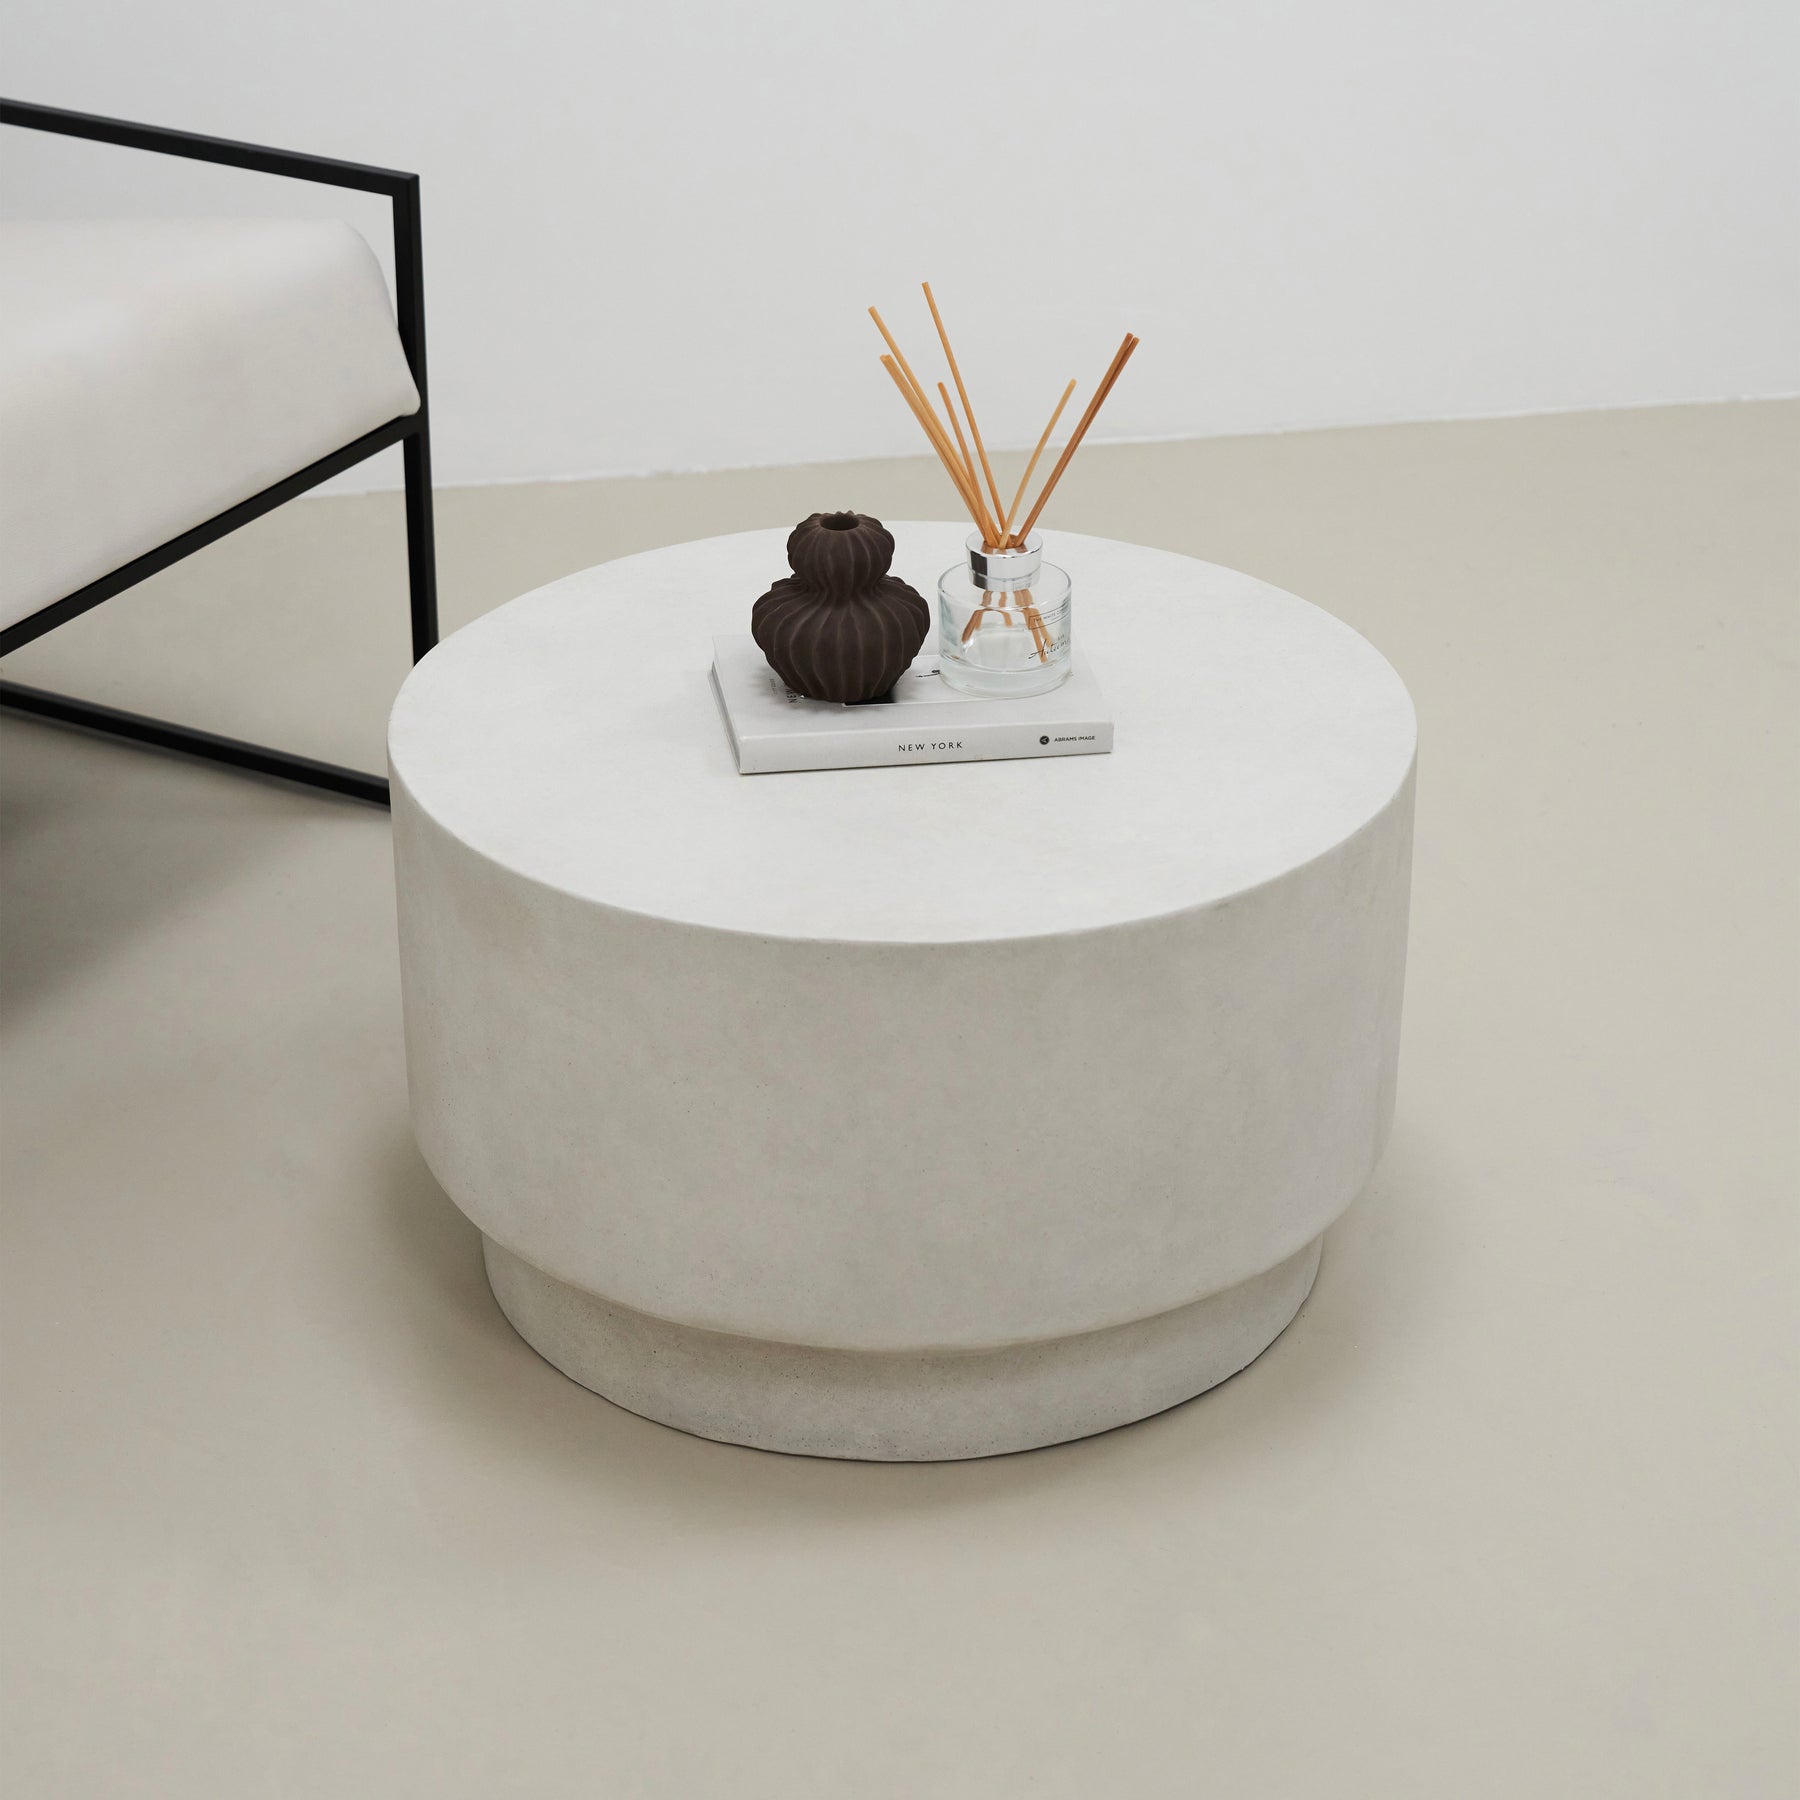 Minimalist concrete round coffee table displayed in living room